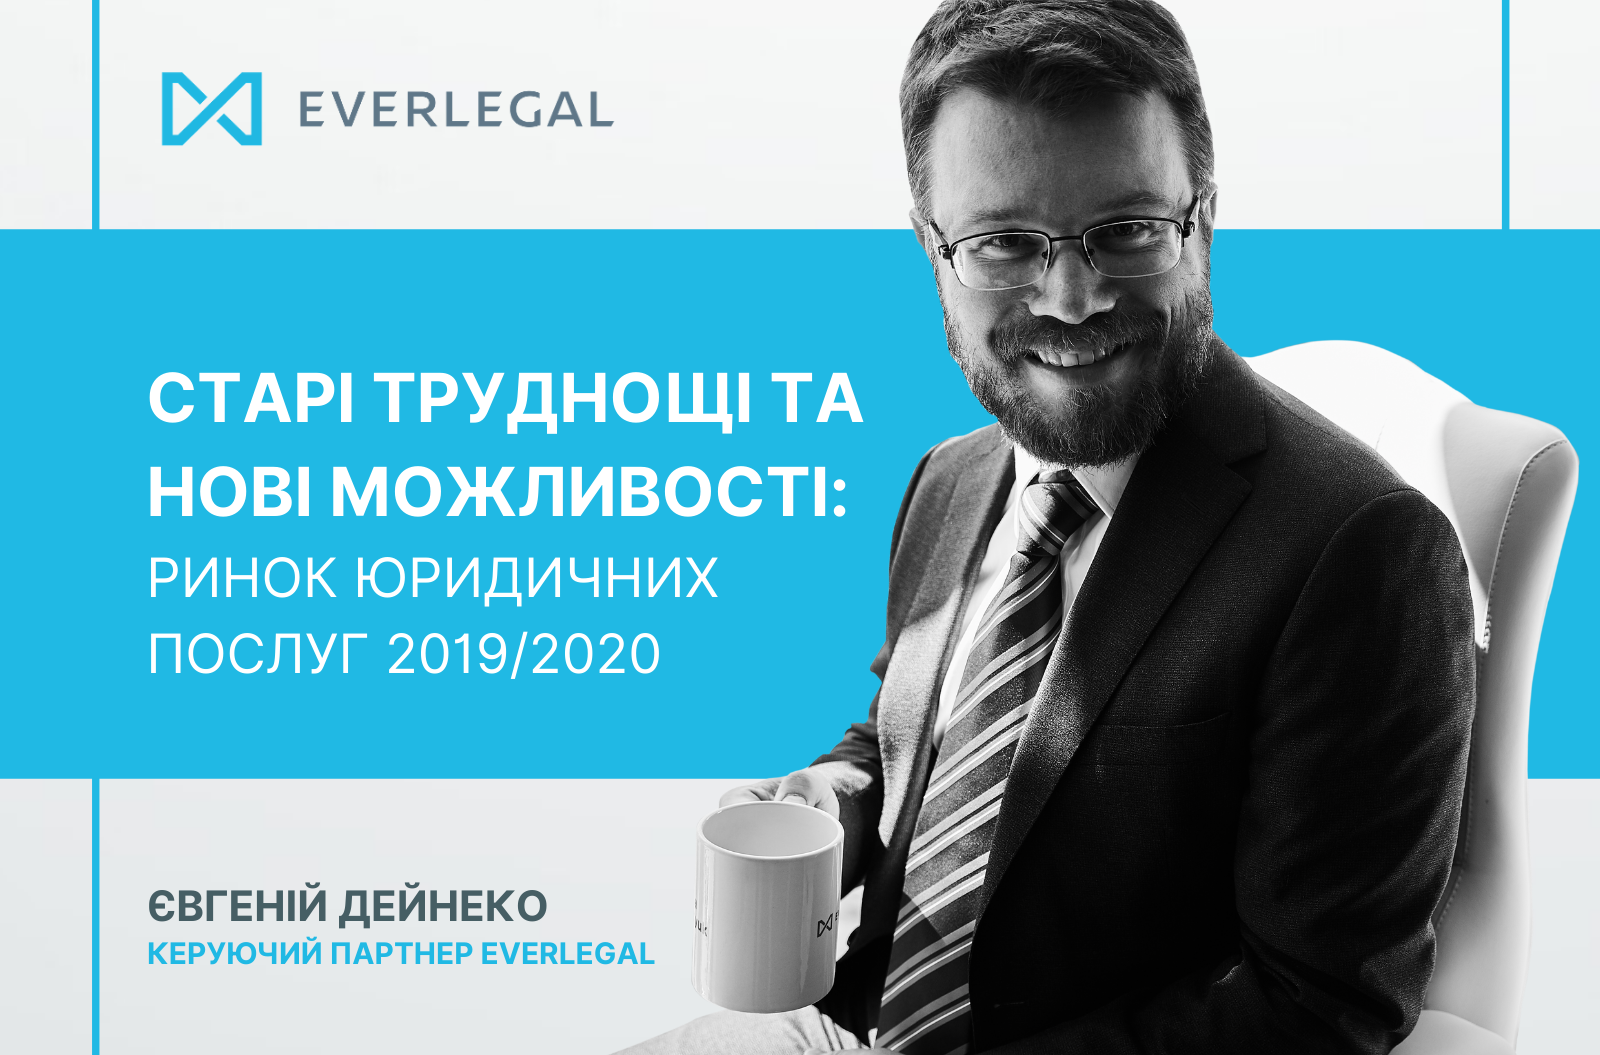 Old challenges and new opportunities: legal market 2019/2020